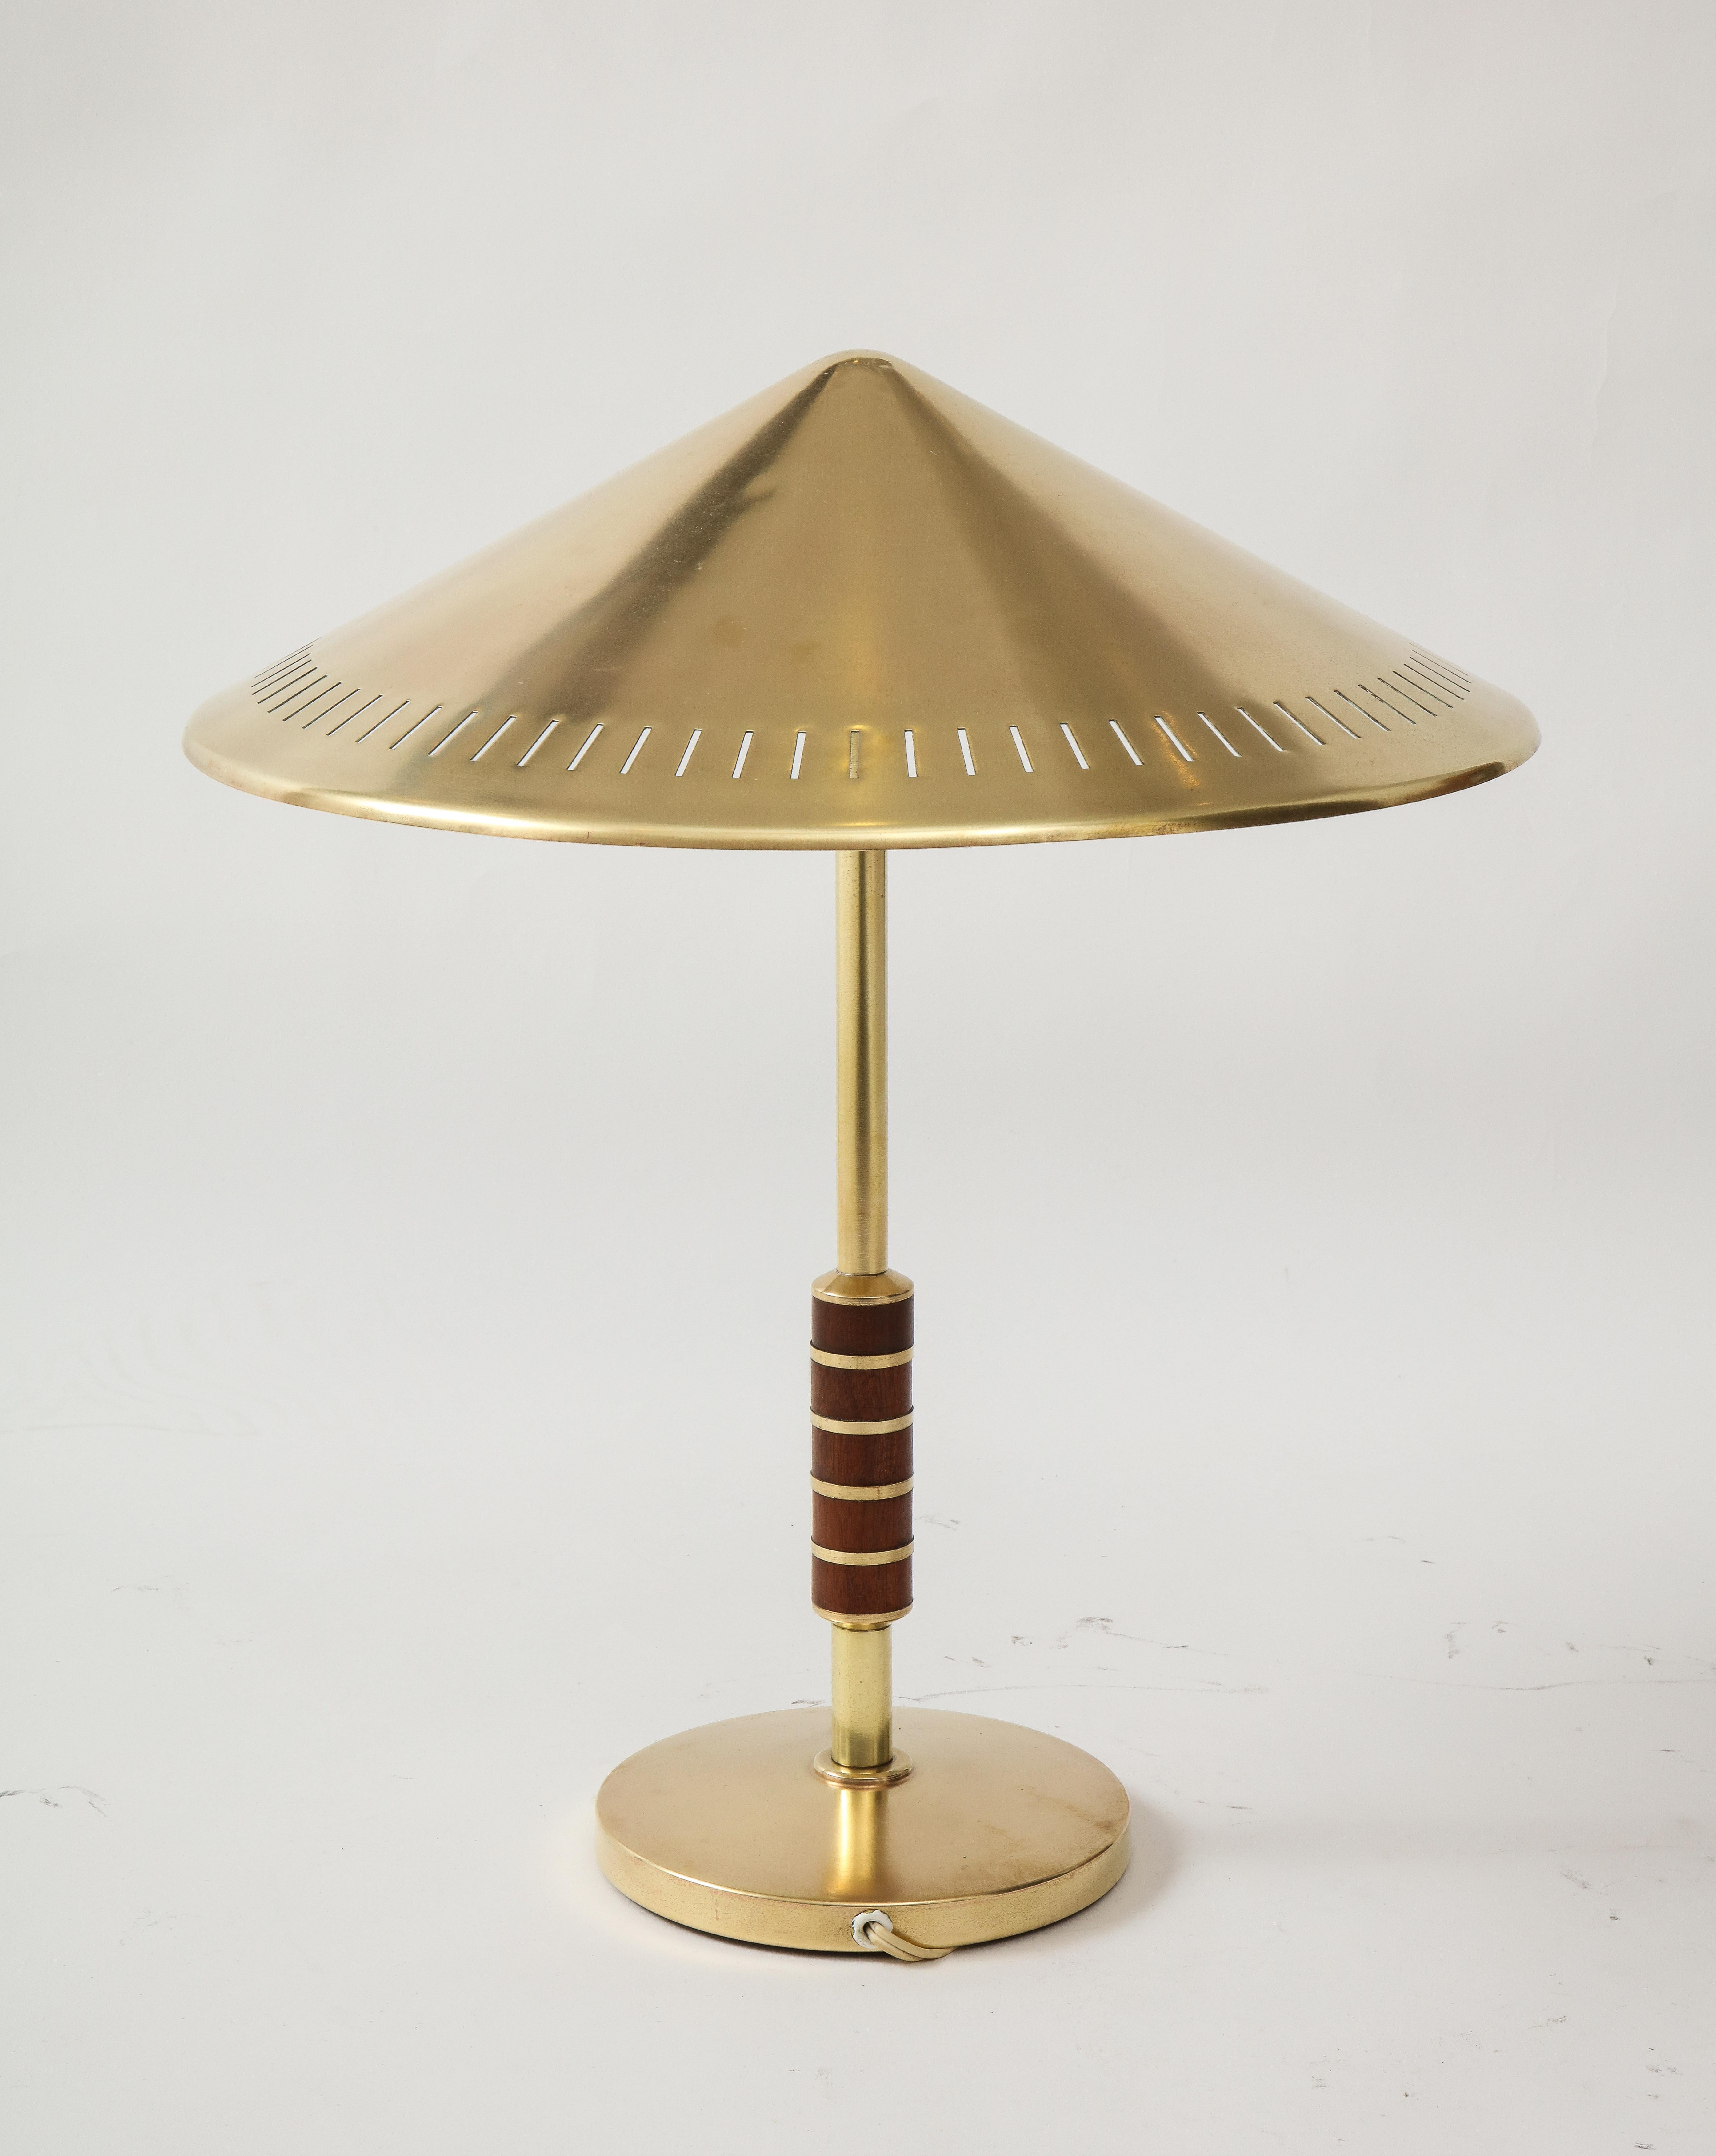 A Danish brass table lamp produced by Lyfa 1956 and designed by Bent Karlby. Model B146. Solid brass cone form shade with two-lights, stem with rosewood banding. Re-wire for the US. Two 60 watt max.